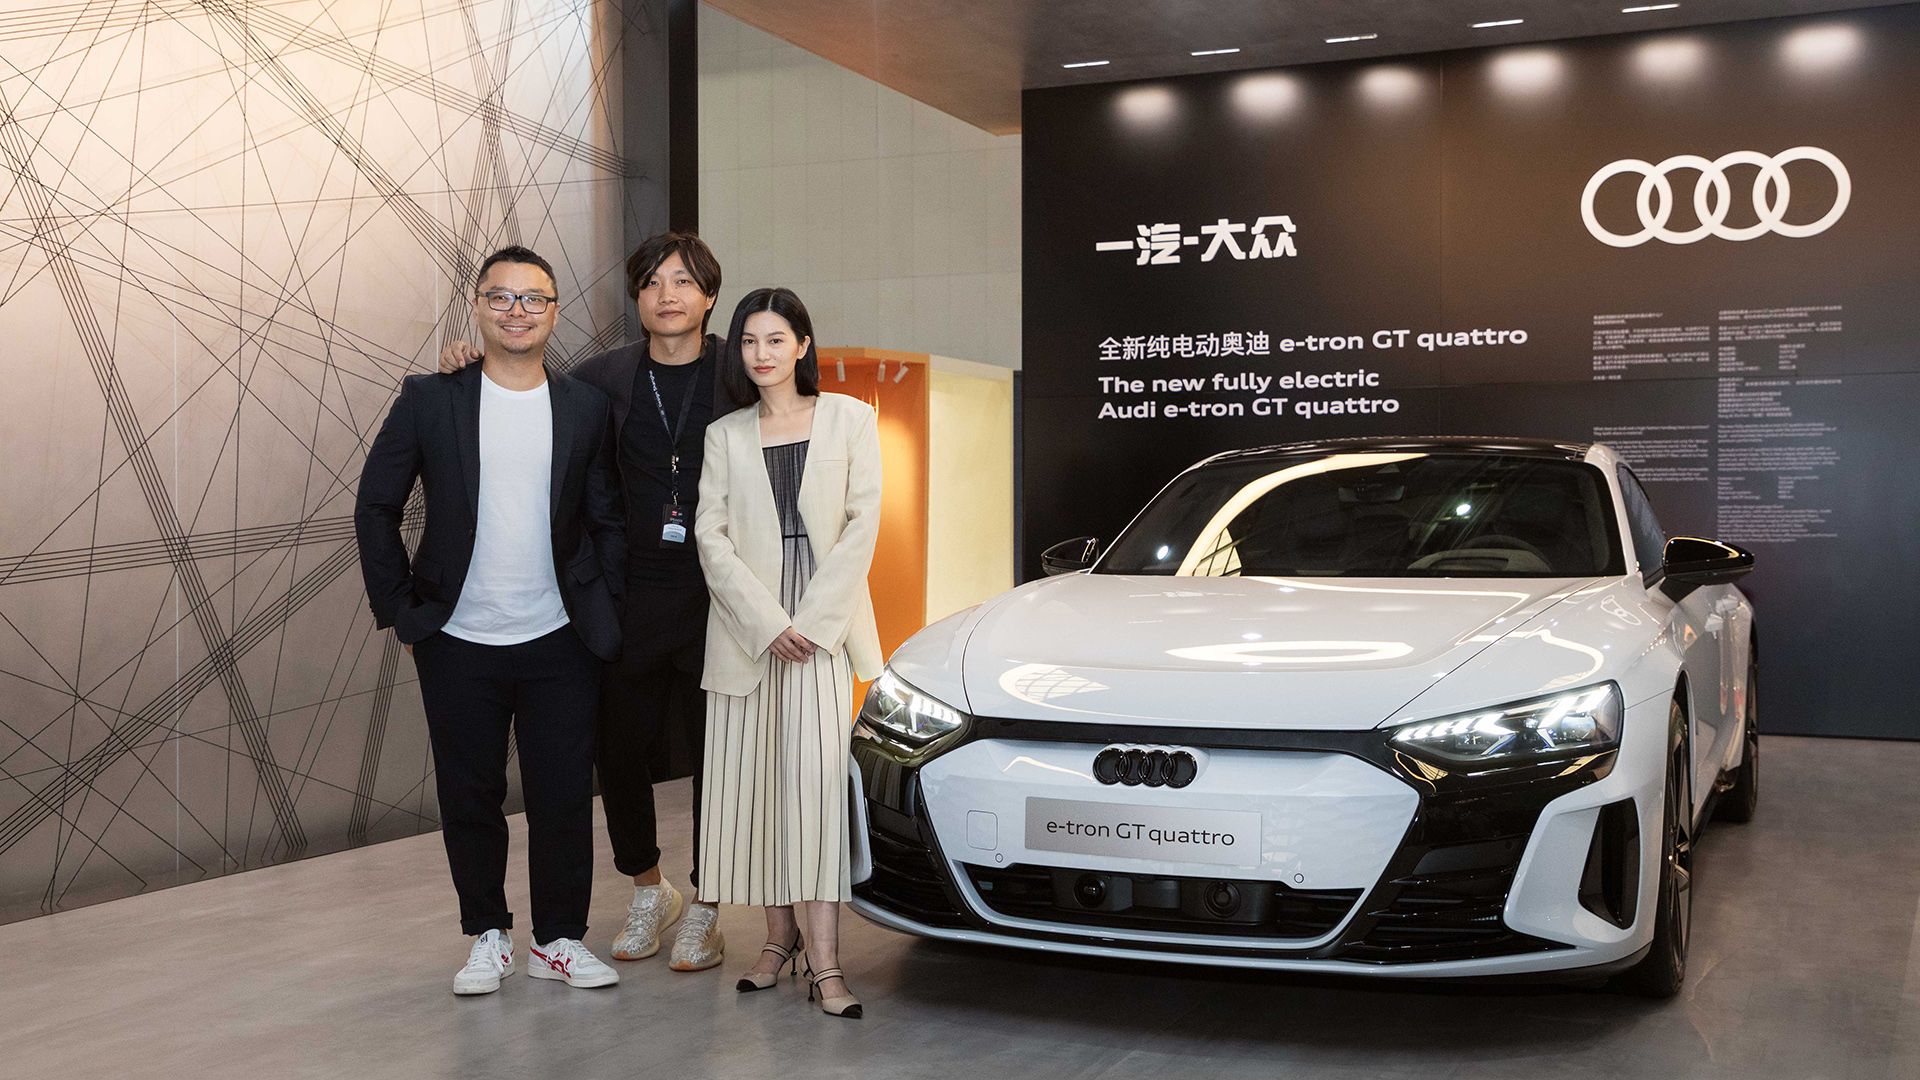 Yu (Scott) Zhao, Head of Audi Innovation Research at Audi China, and Yunzhou Wu, Senior Interior Designer and Interior Design Coordinator, with influencer Licheng Ling at the Audi e-tron GT quattro.